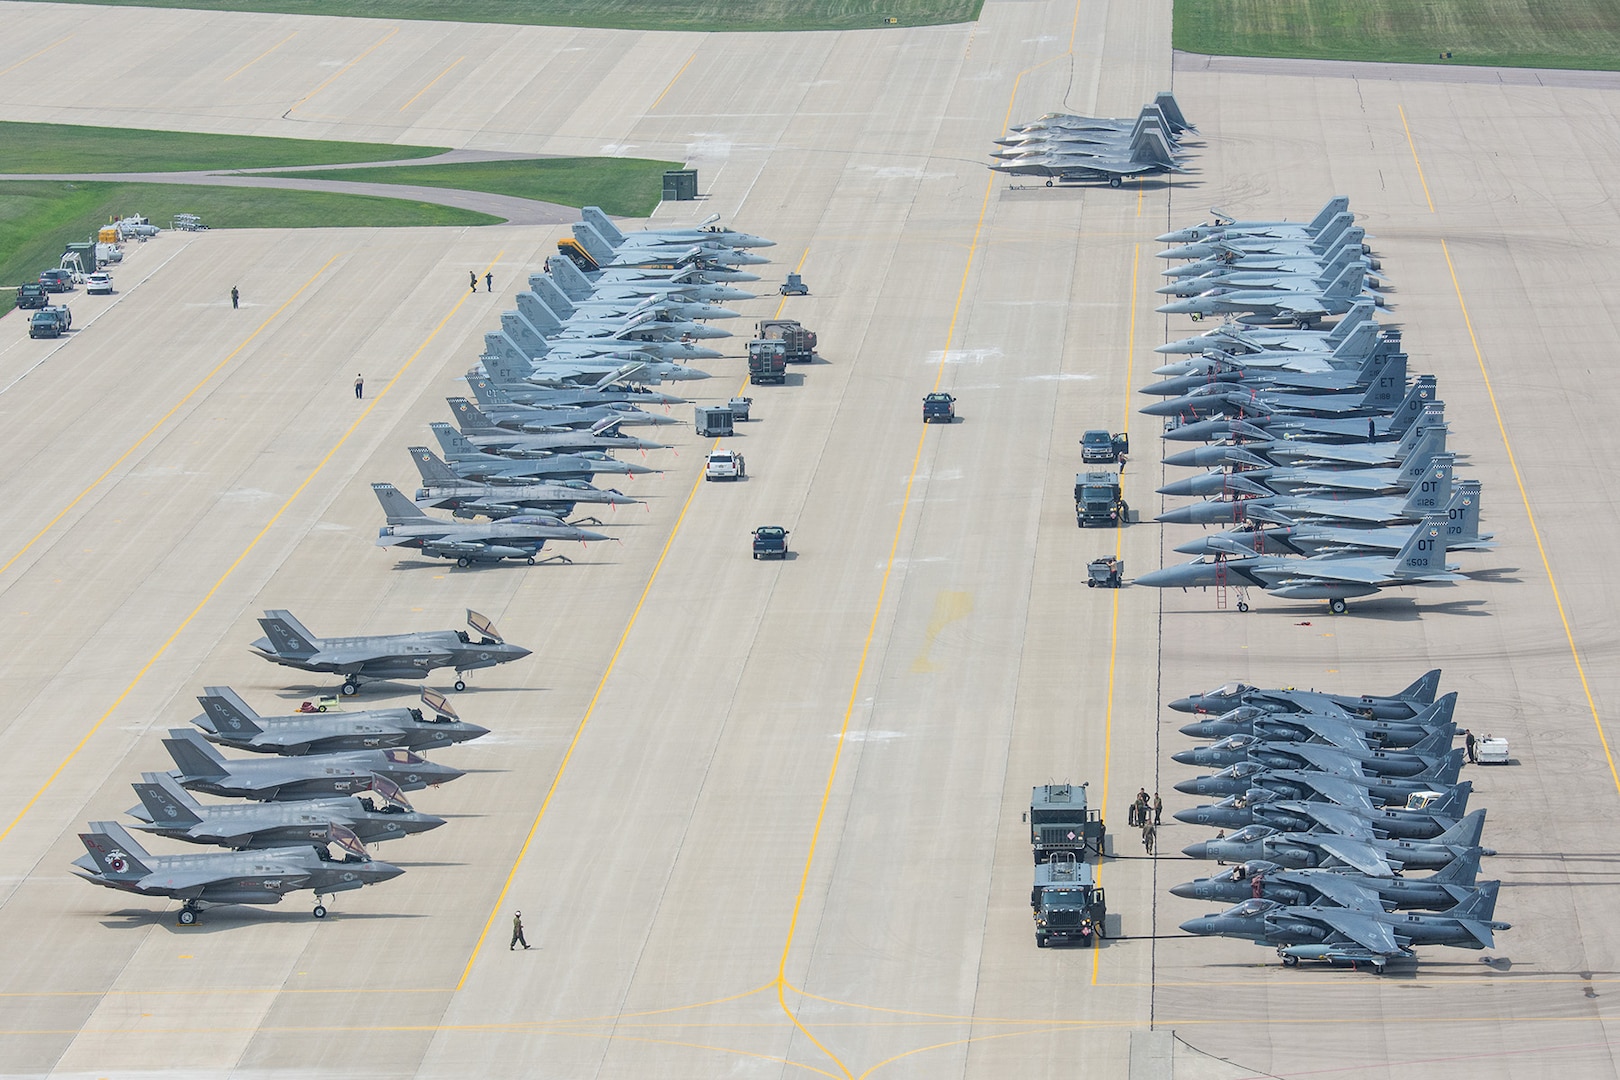 Annual Northern Lightning exercise returns to Volk Field > National